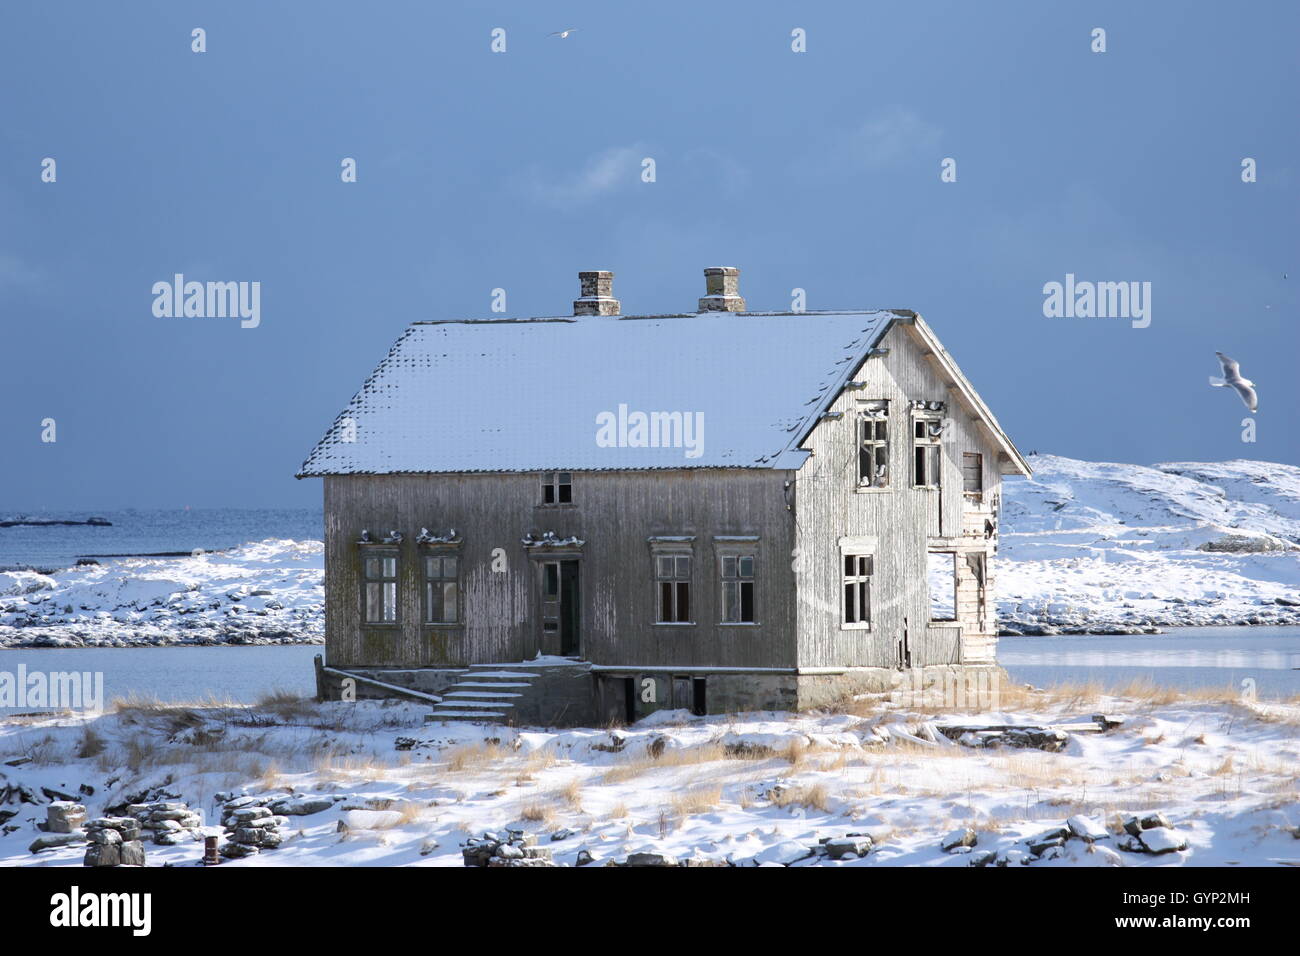 Abandoned old wooden house in snowy Røst, the outermost island in Lofoten, Norway. Stock Photo